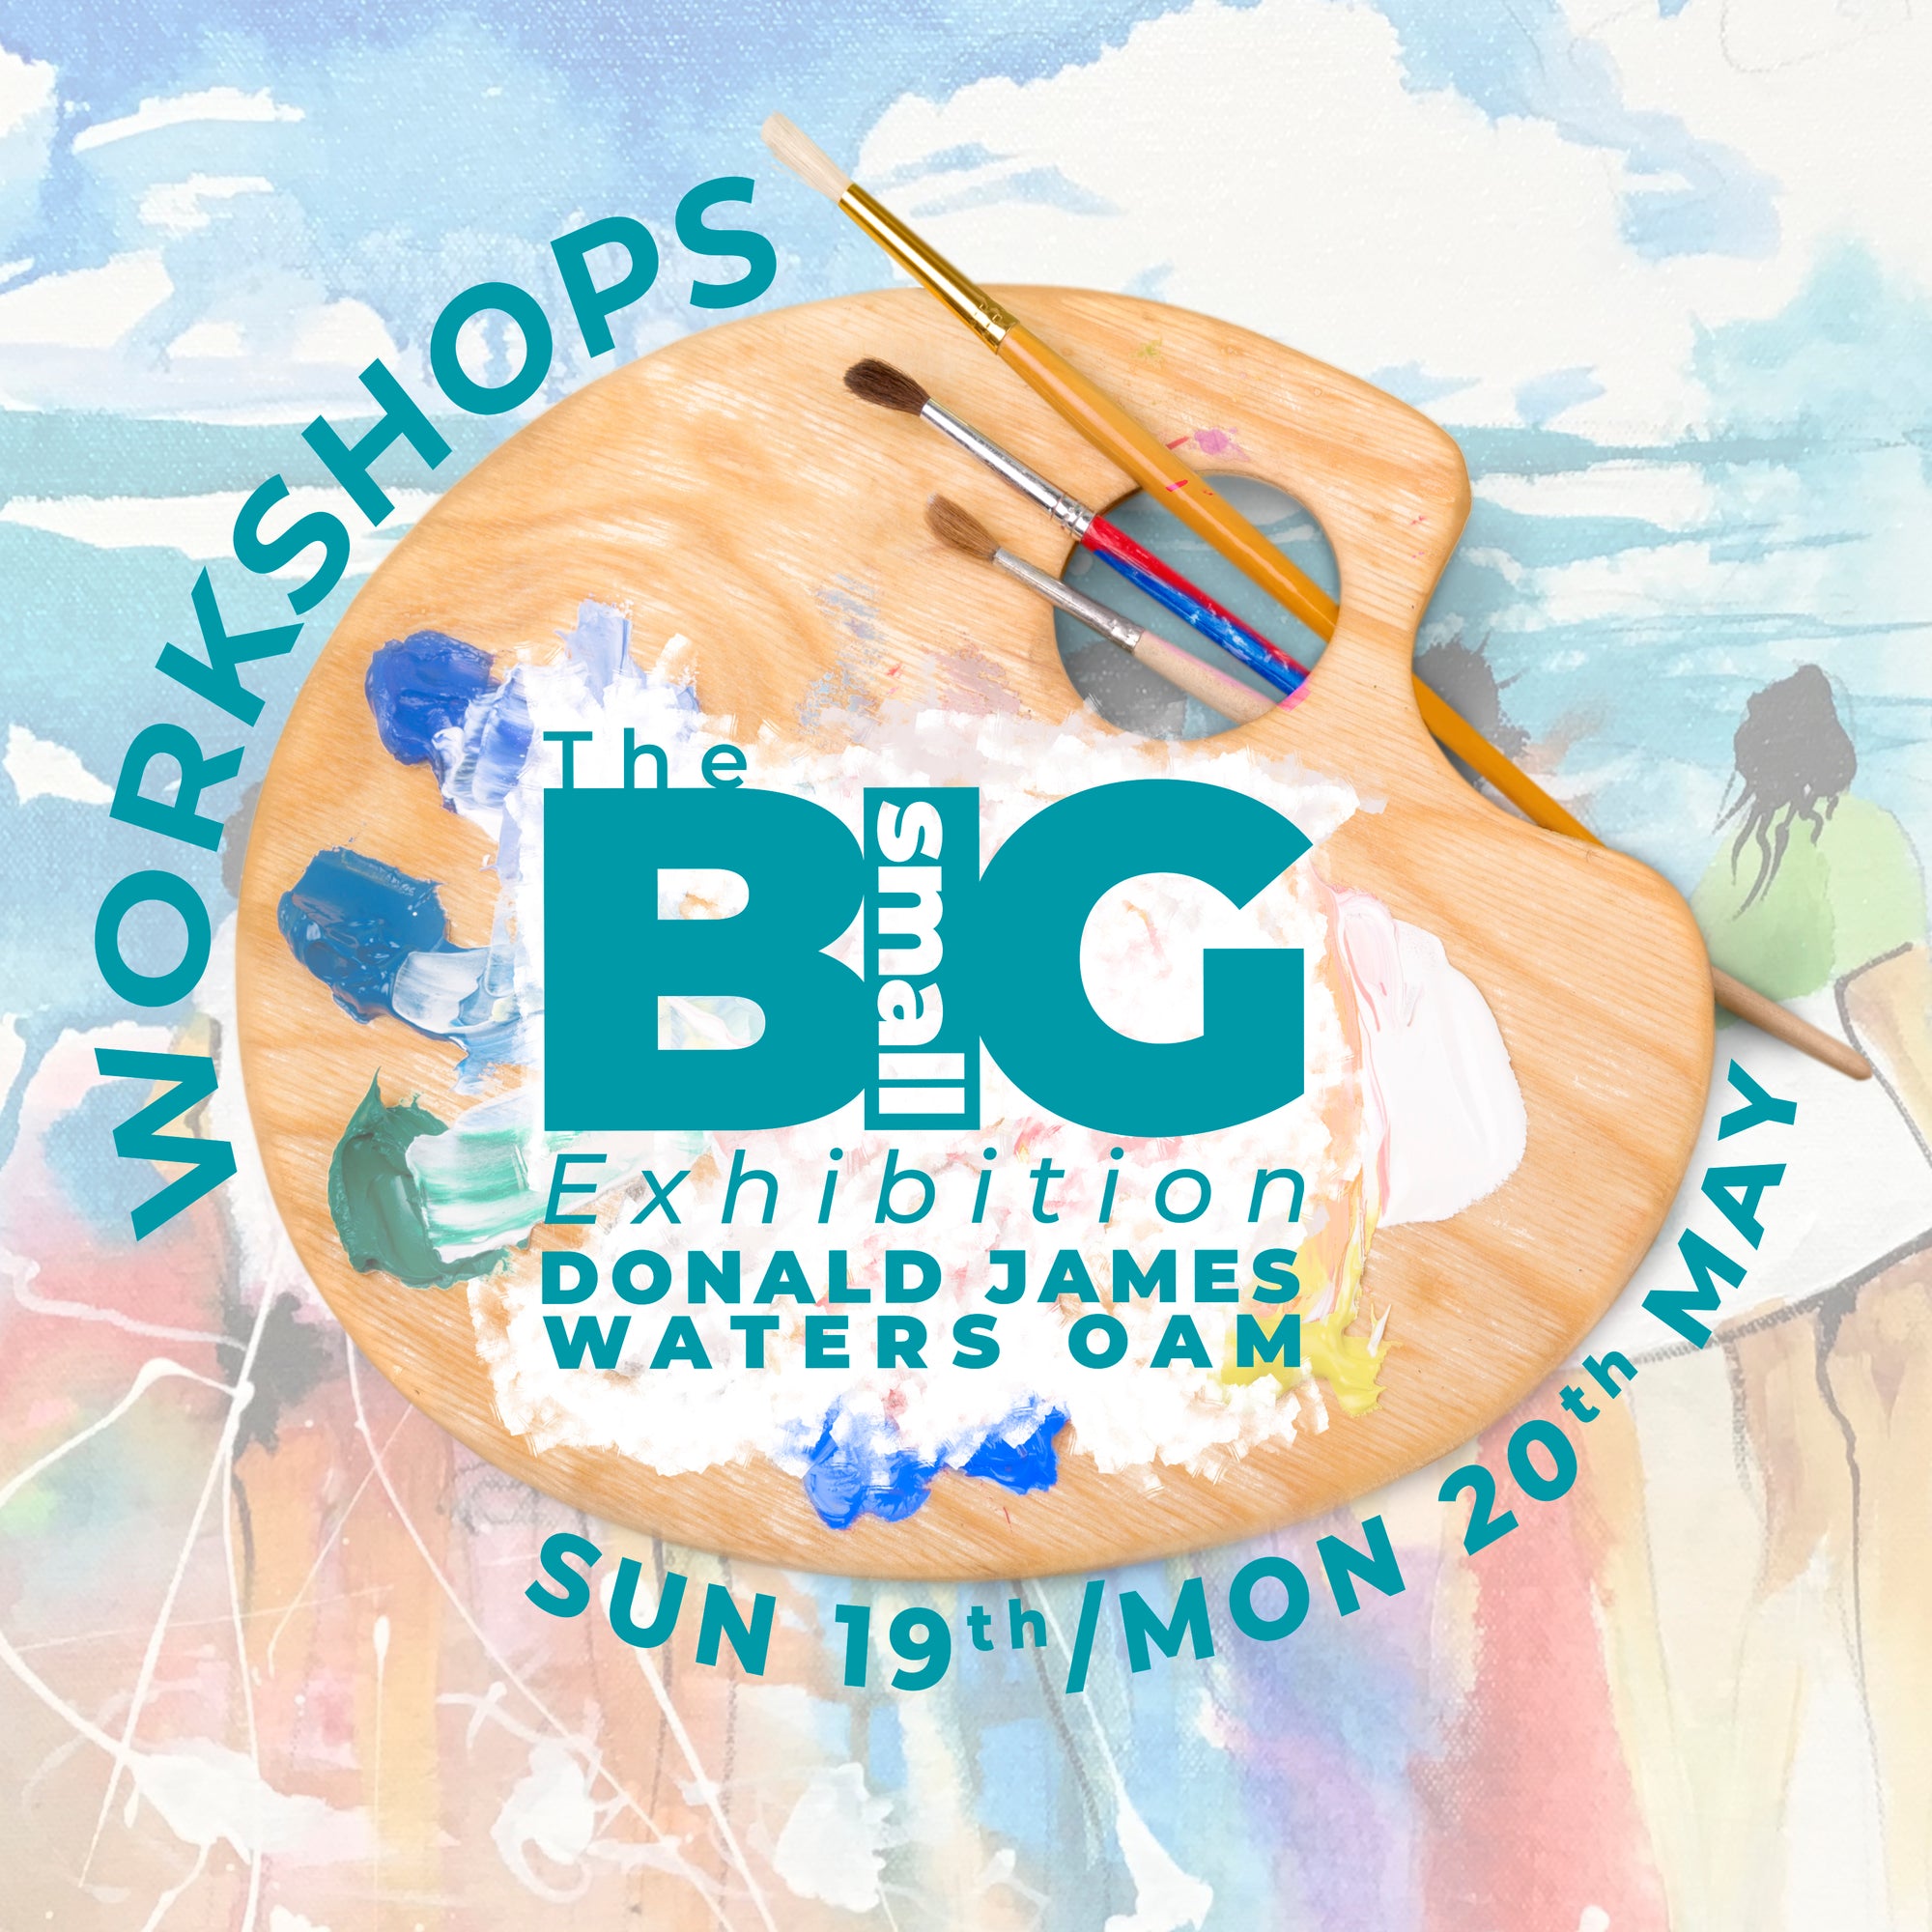 Workshops: ‘THE BIG small EXHIBITION’ - Donald James Waters OAM